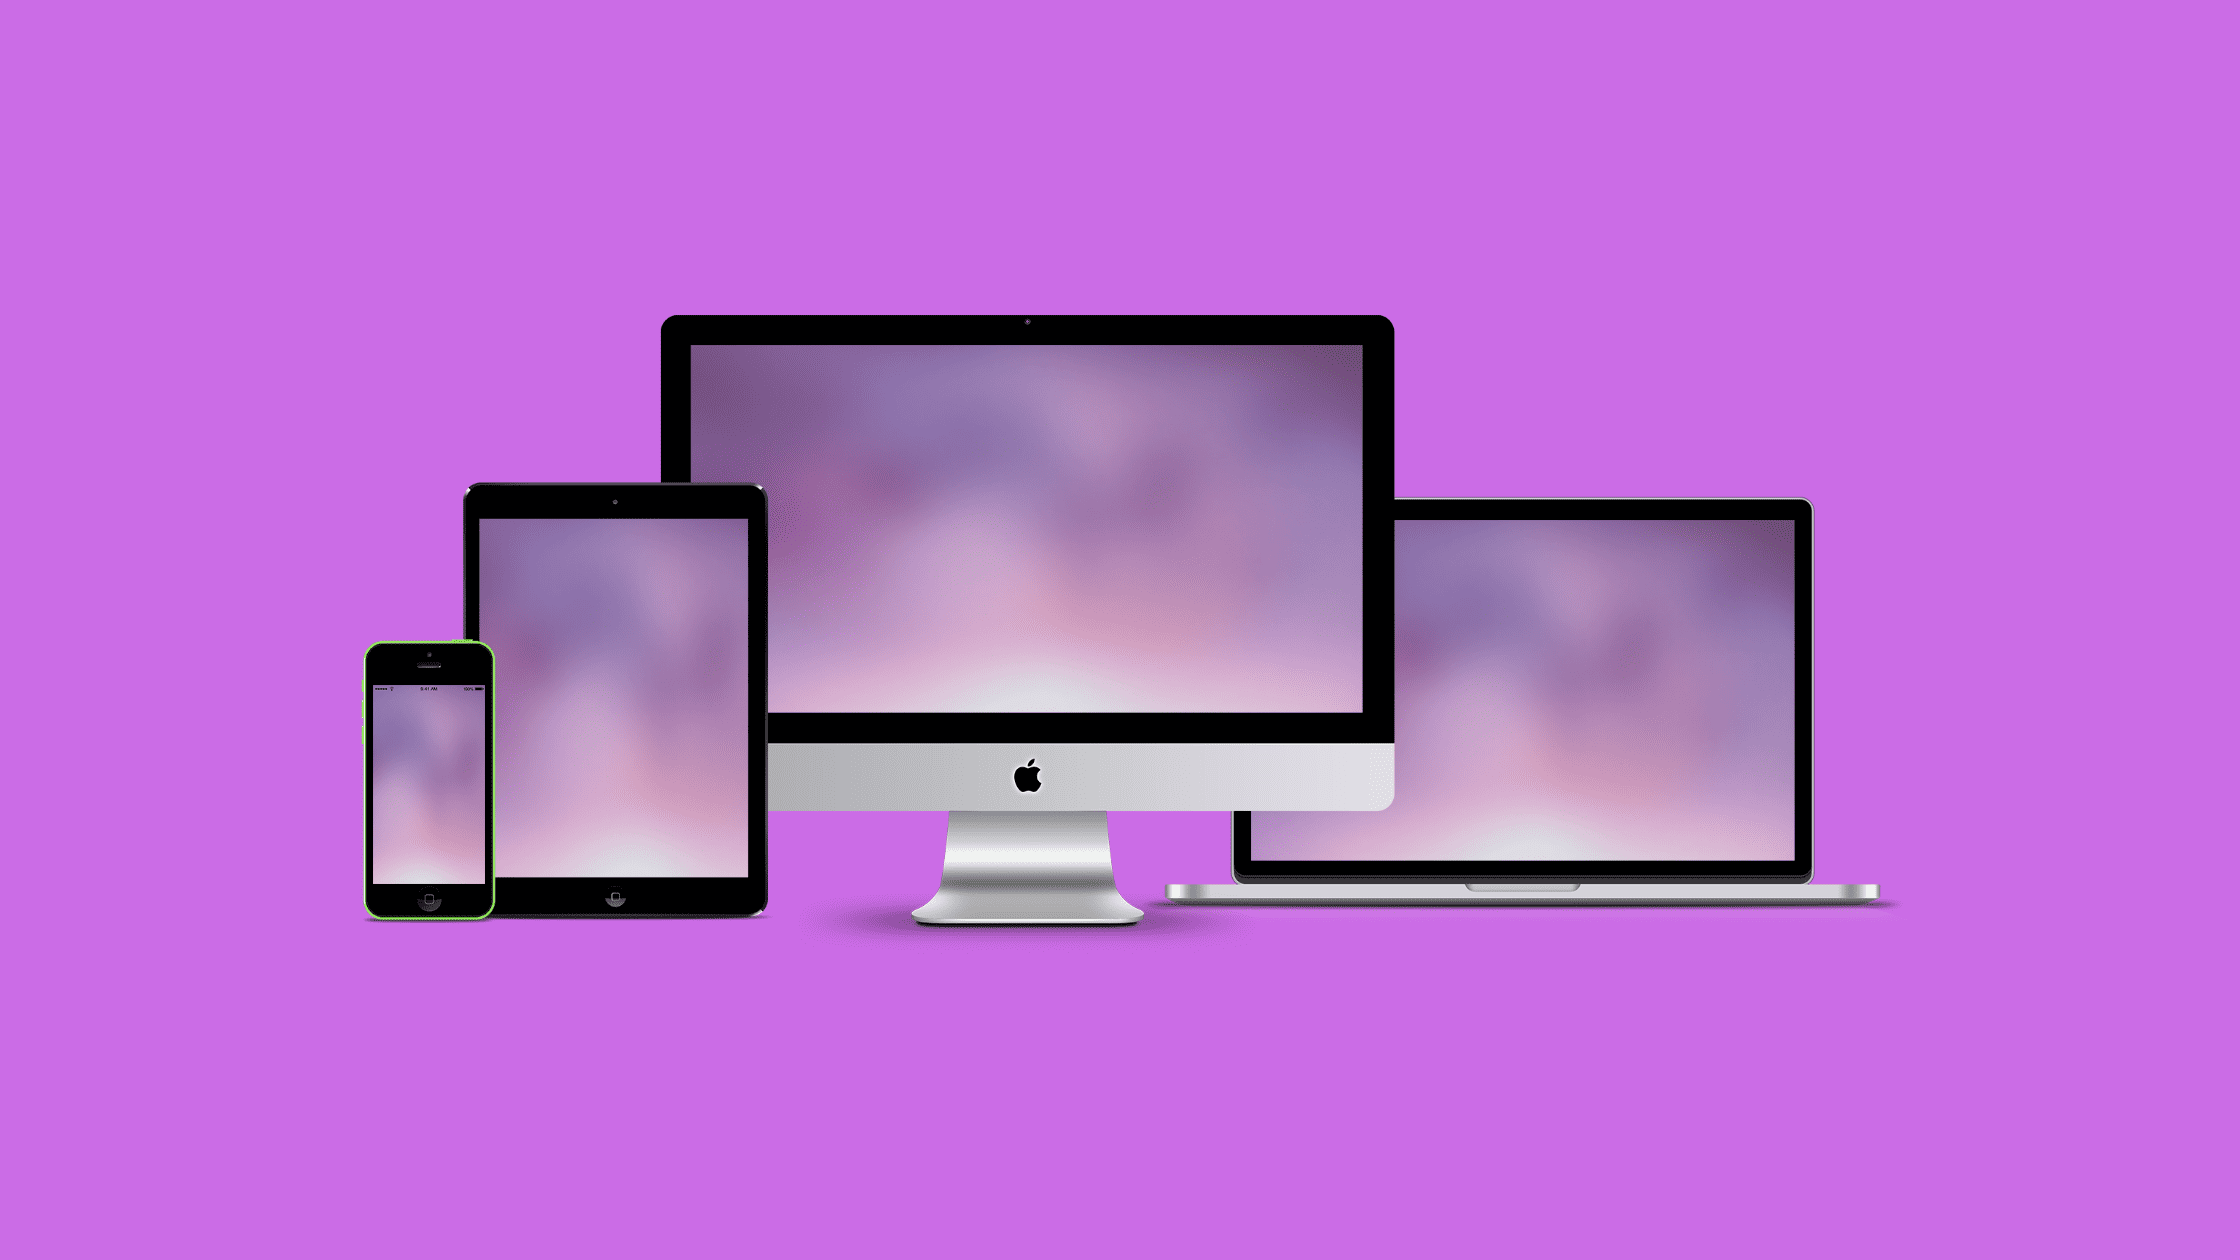 Step By Step Guide To Use Your Ipad As A Second Monitor For Your Macbook